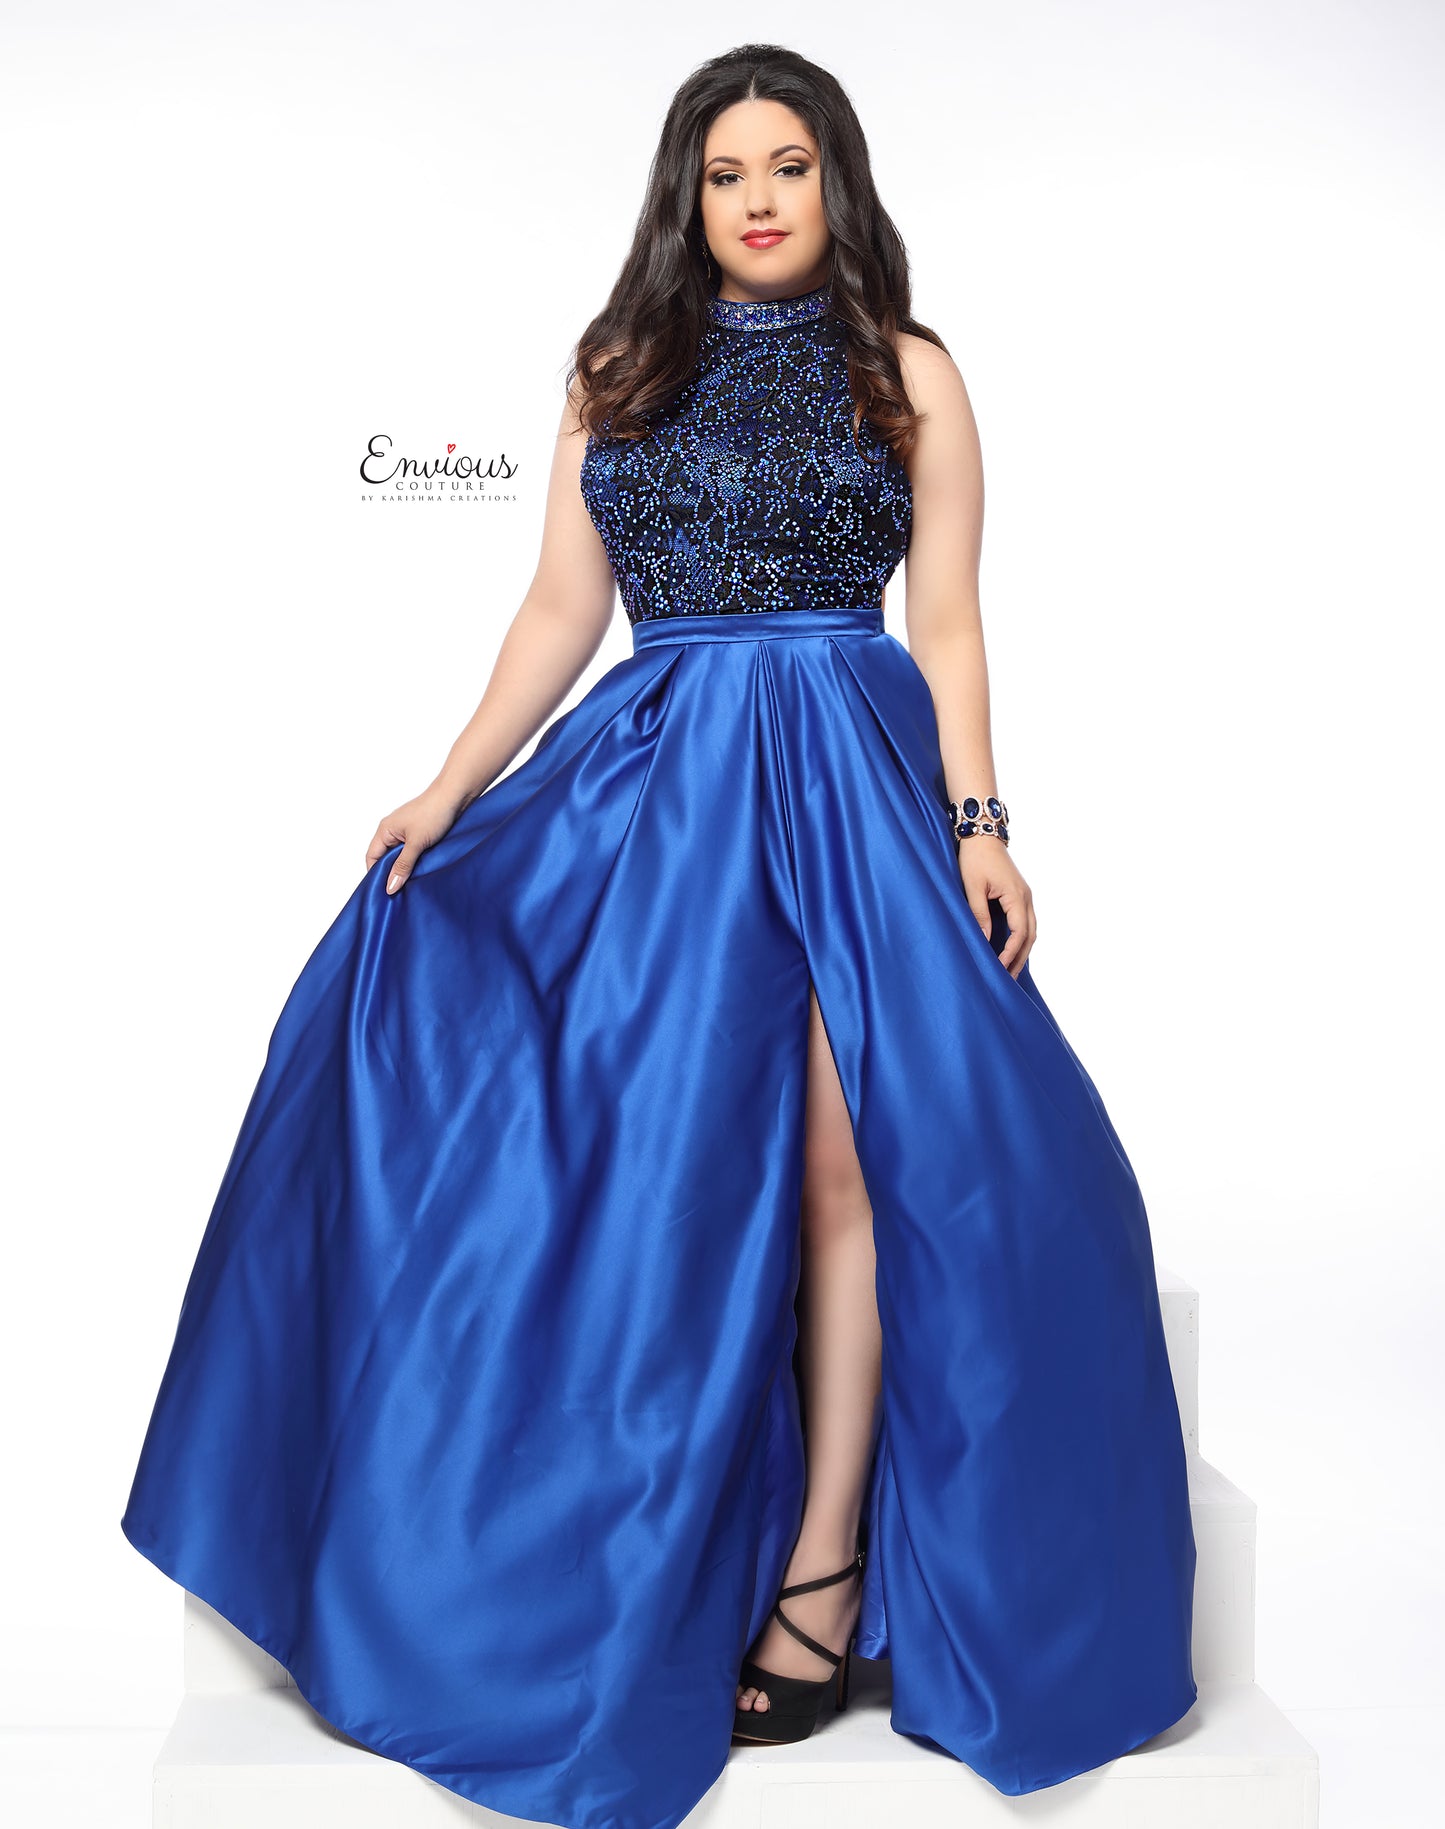 Envious Couture 18104 in stock 16 Royal/Black Prom Dress Pageant Gown